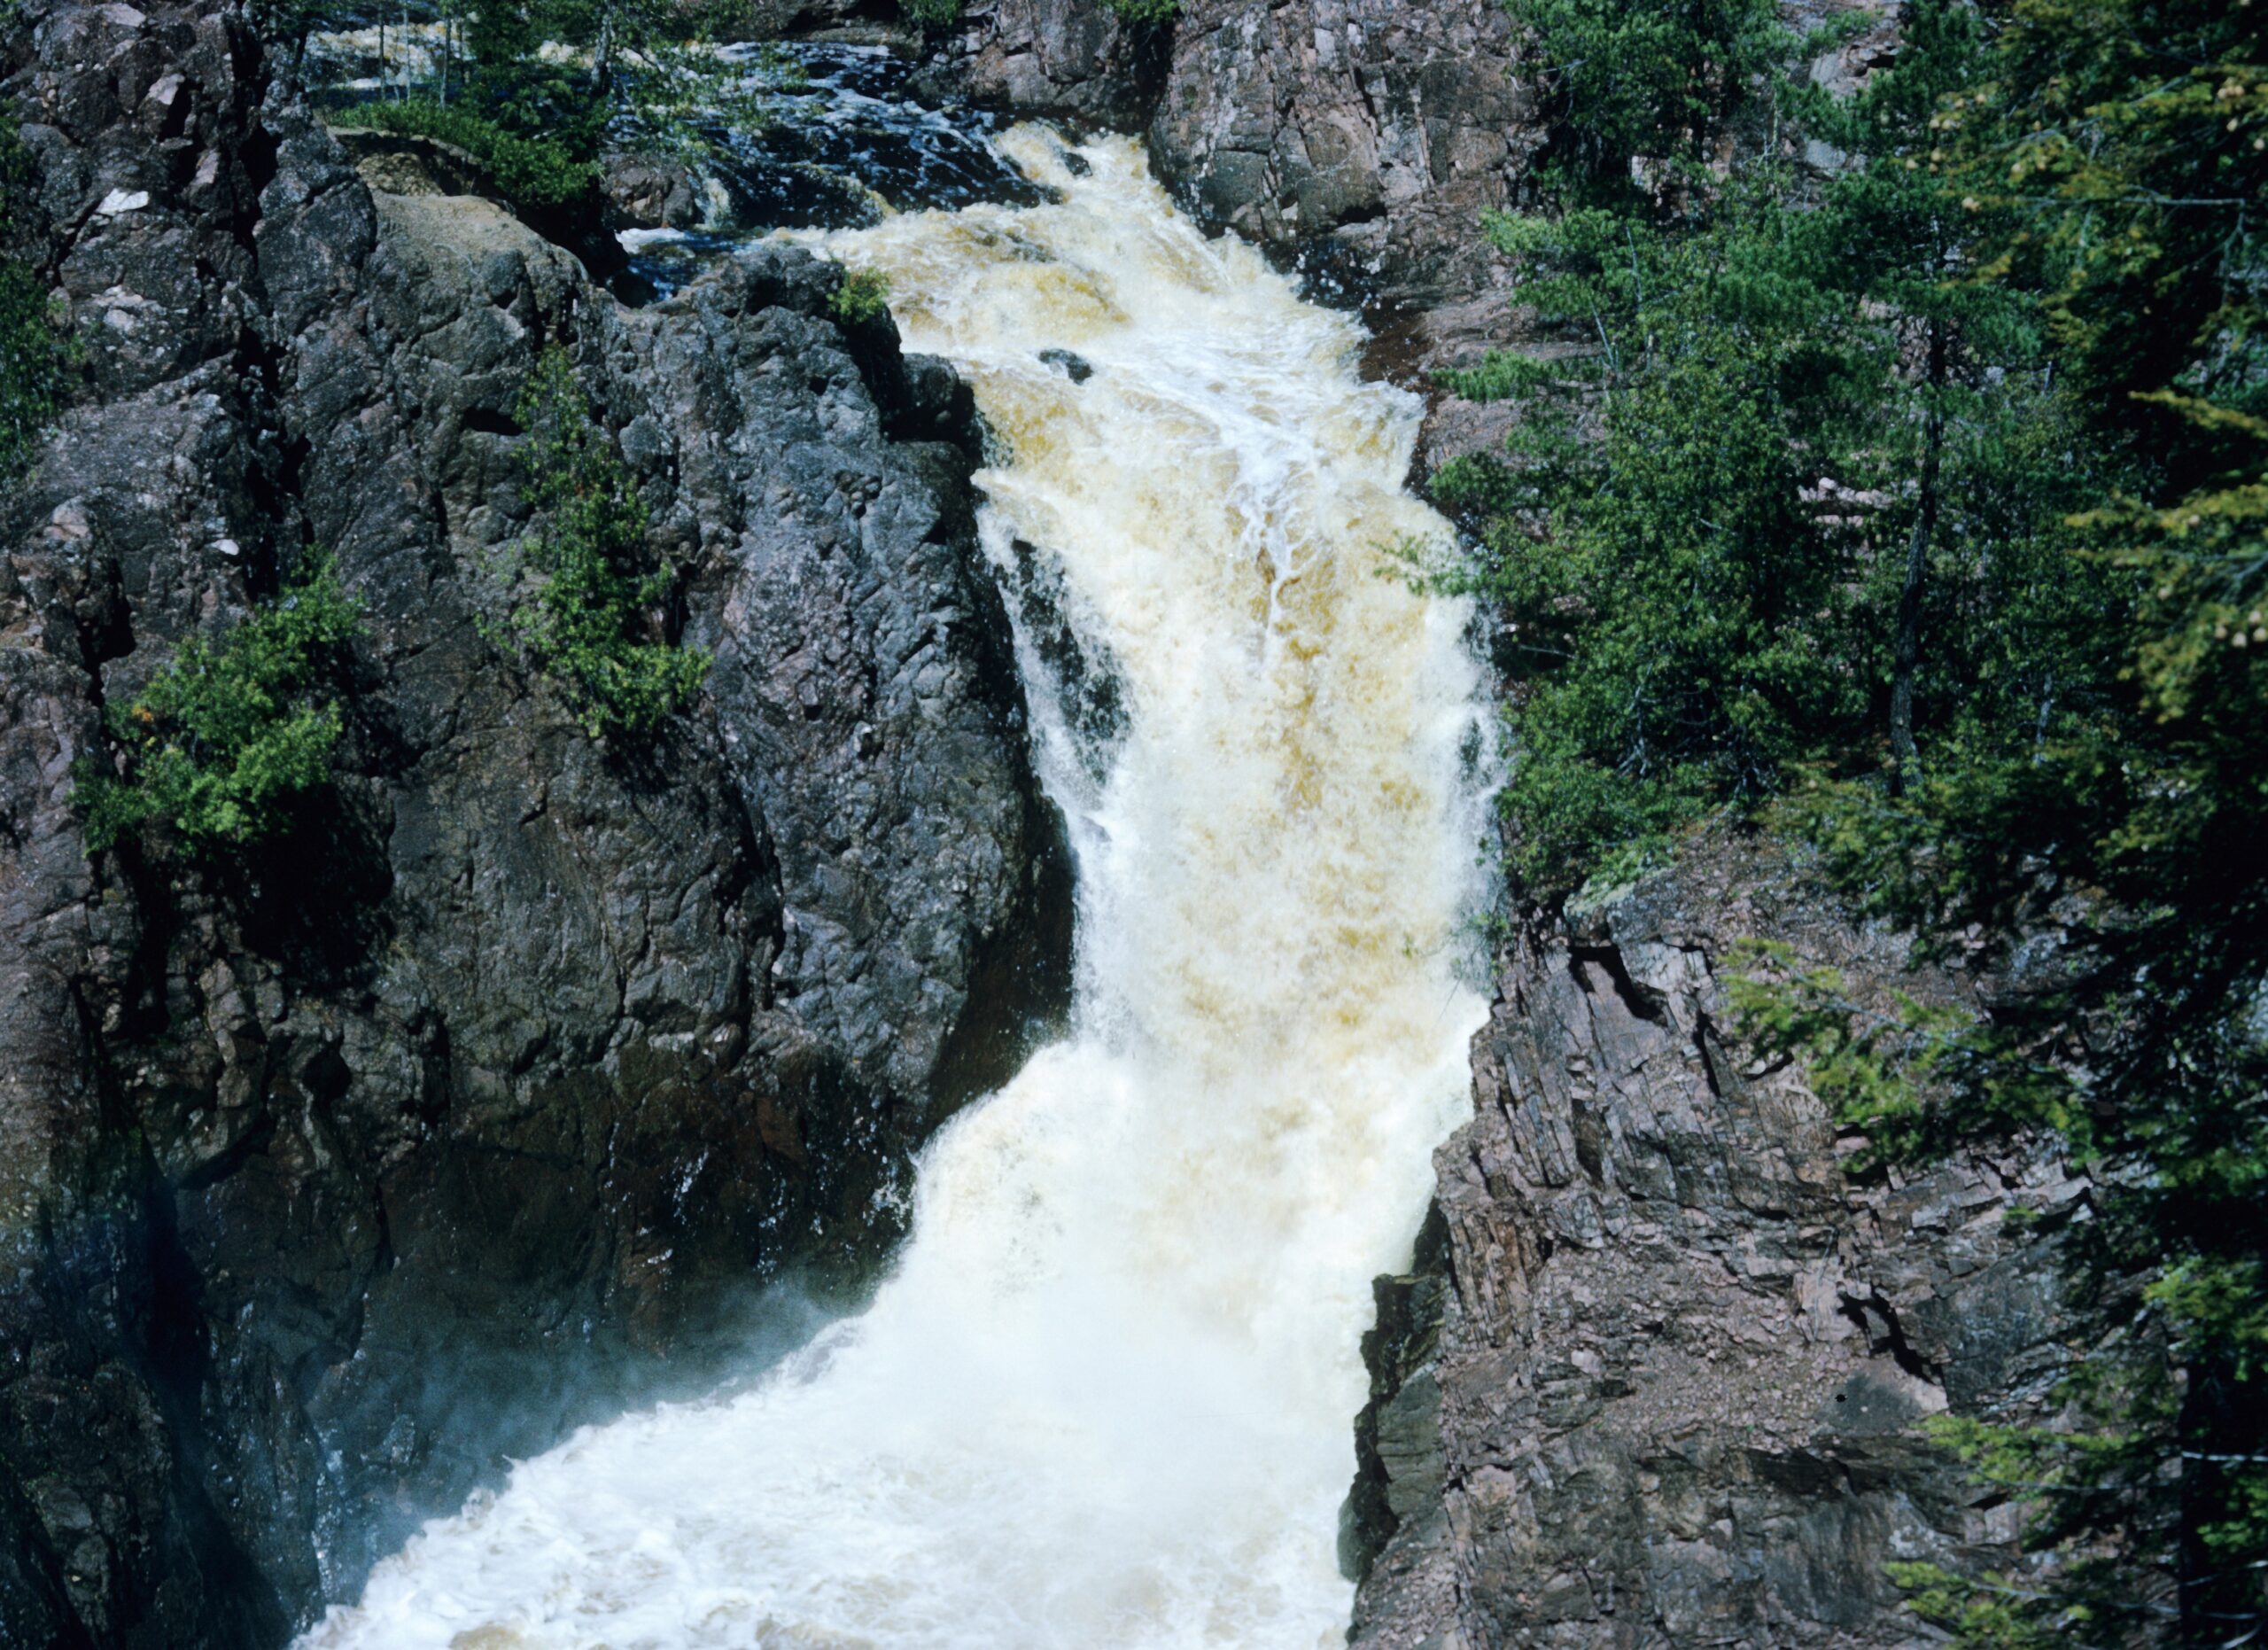 Copper Falls Waterfall at Copper Falls State Park northeast of Mellen